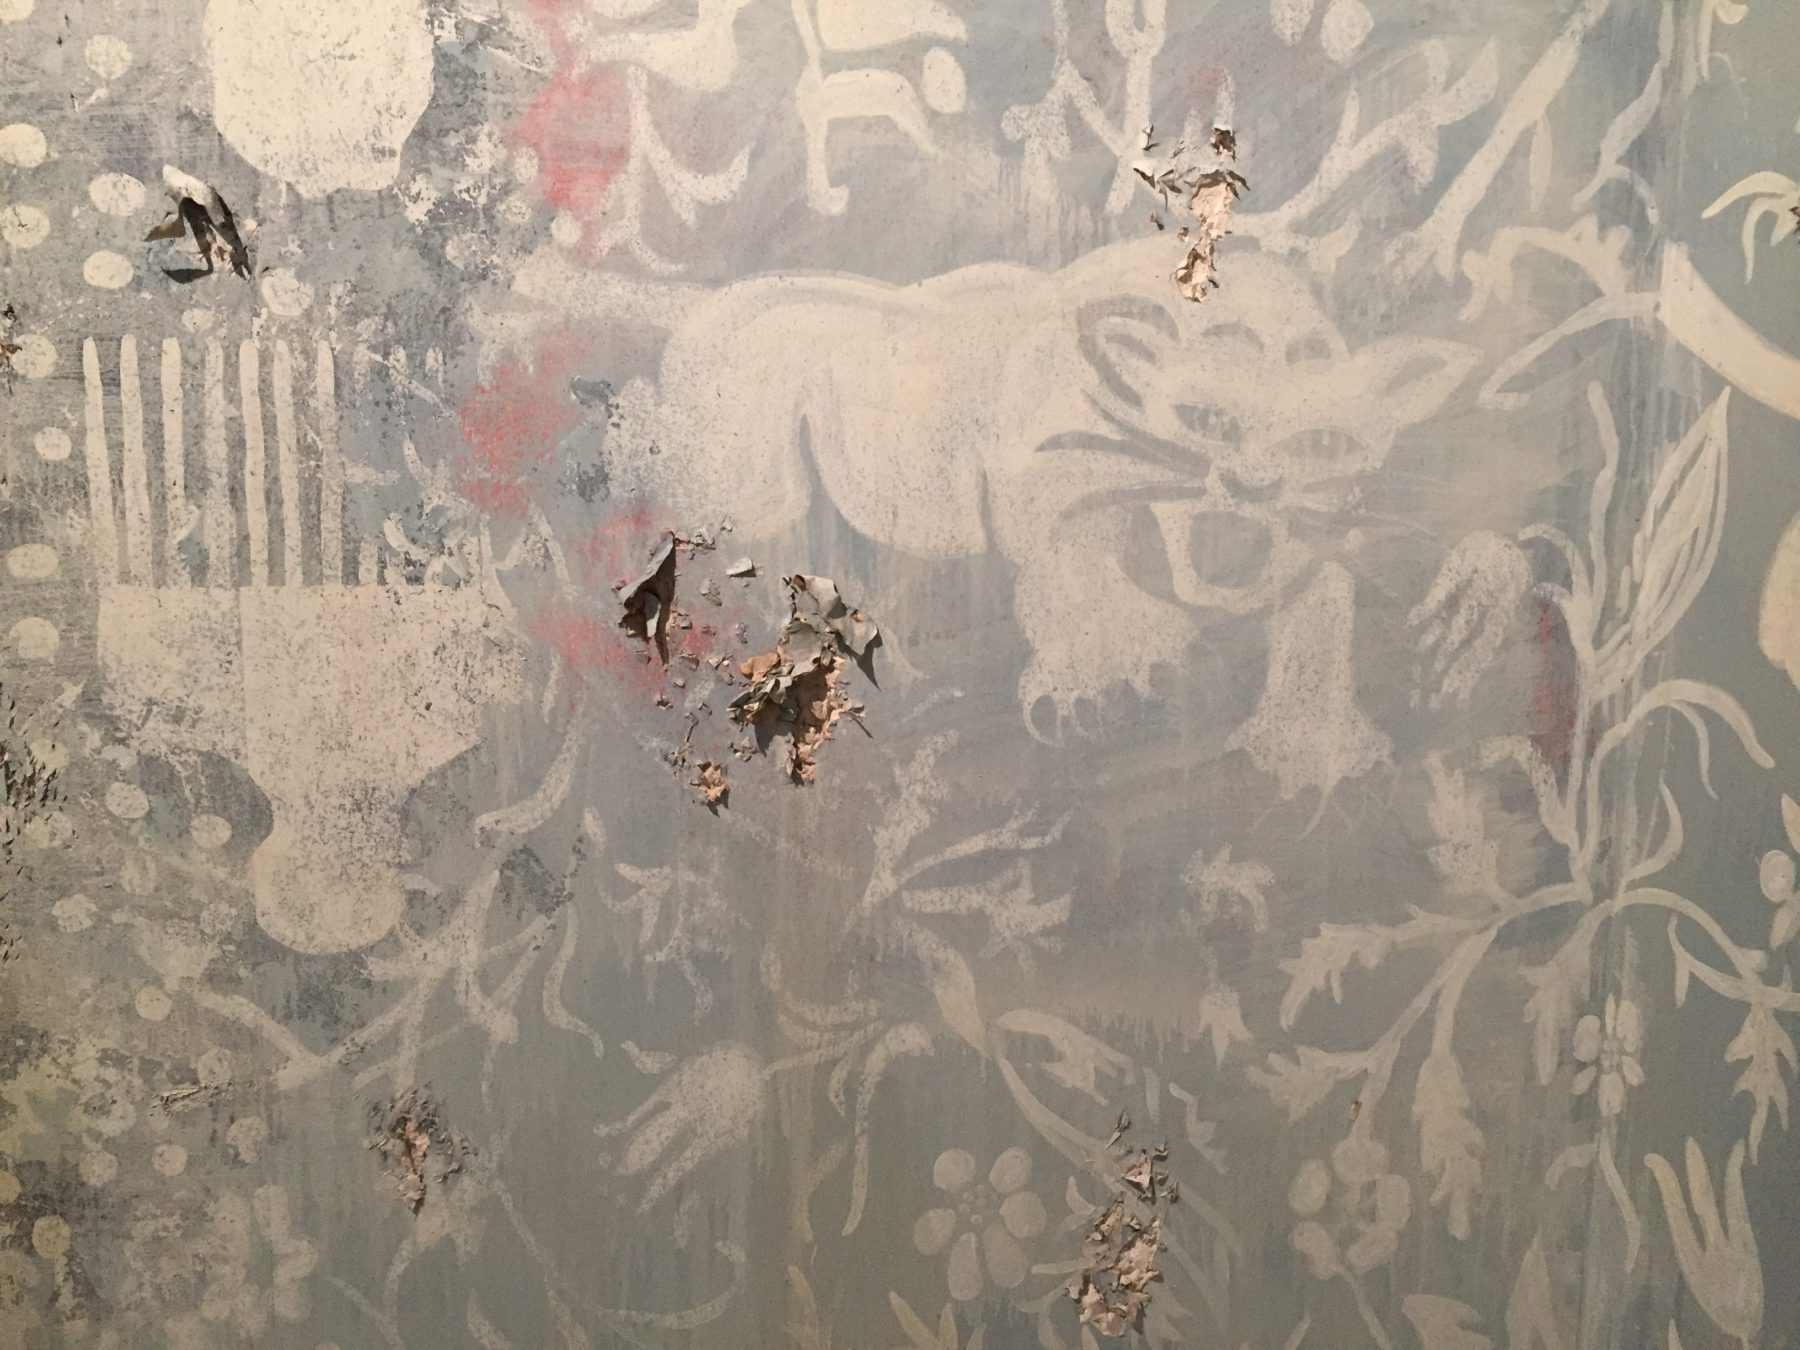 The wall of the Firelei Baez exhibition space, painted pale blue with white floral shapes. Paint has been scraped away in a few places on the wall.